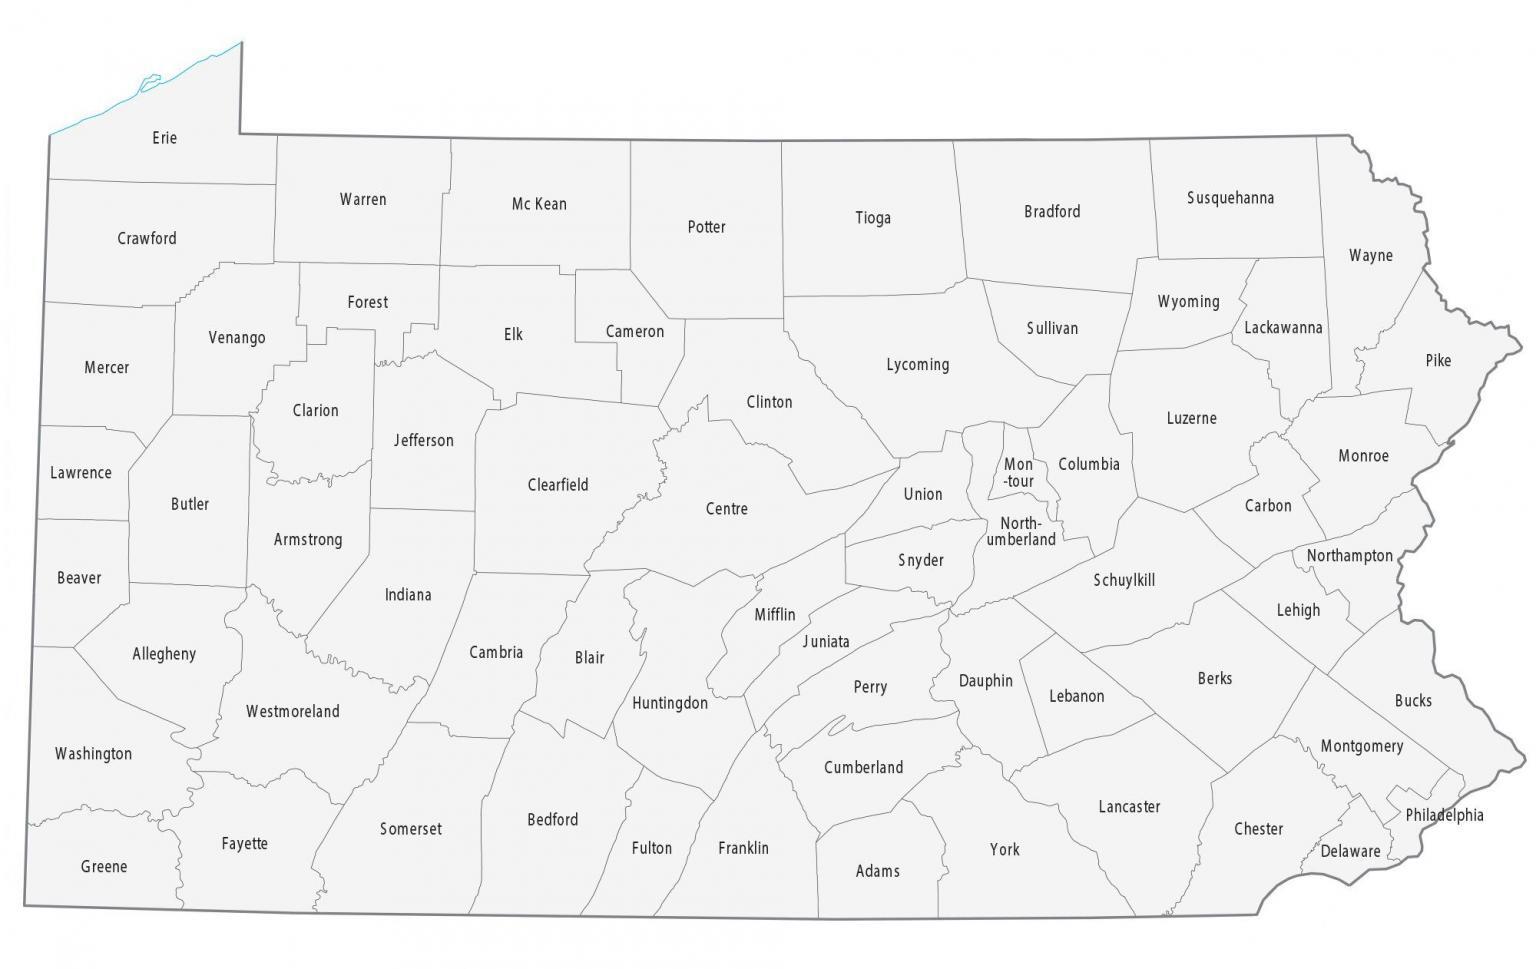 Map of Pennsylvania - Cities and Roads - GIS Geography